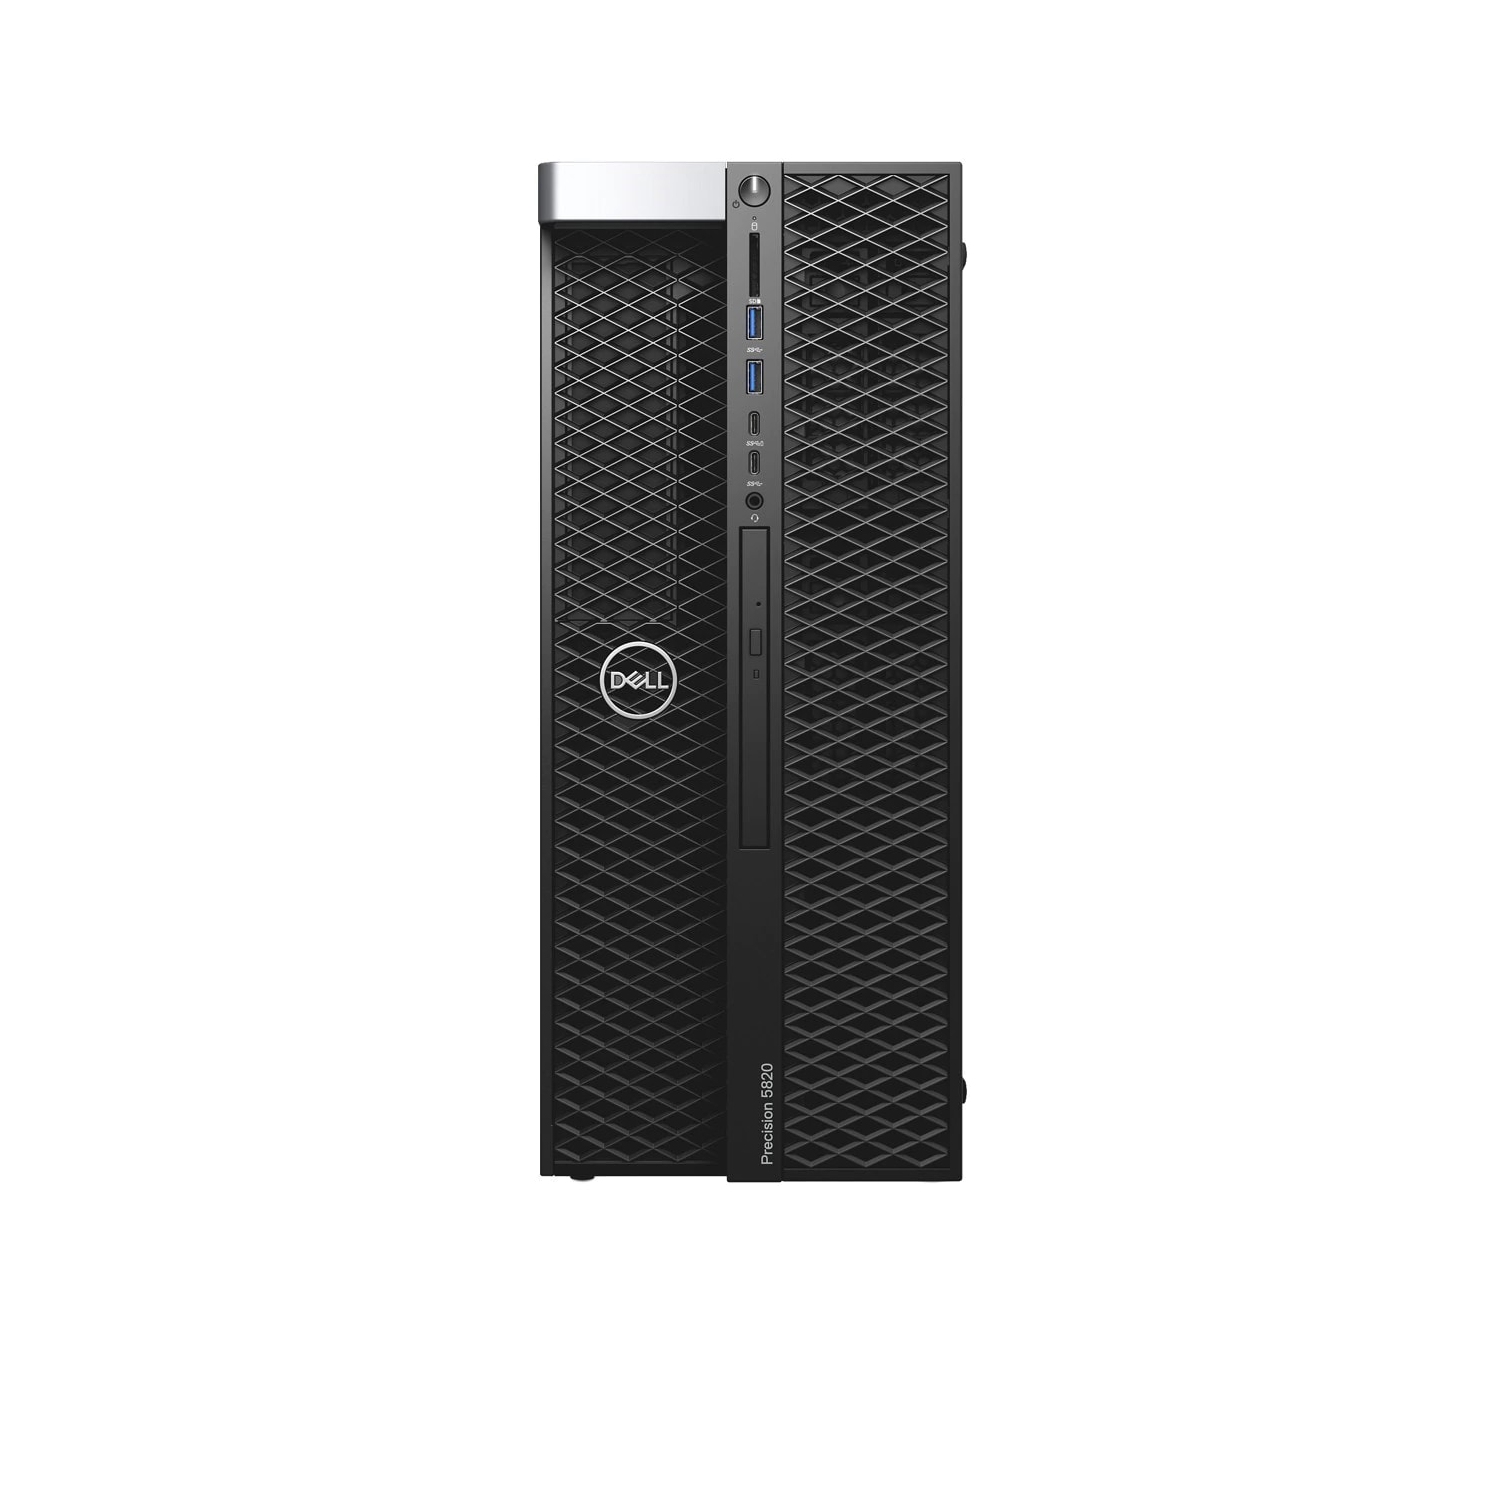 Refurbished (Excellent) - Dell Precision T5820 Workstation Desktop (2018) | Core Xeon W - 512GB SSD - 32GB RAM - RTX 4000 | 6 Cores @ 4.6 GHz Certified Refurbished